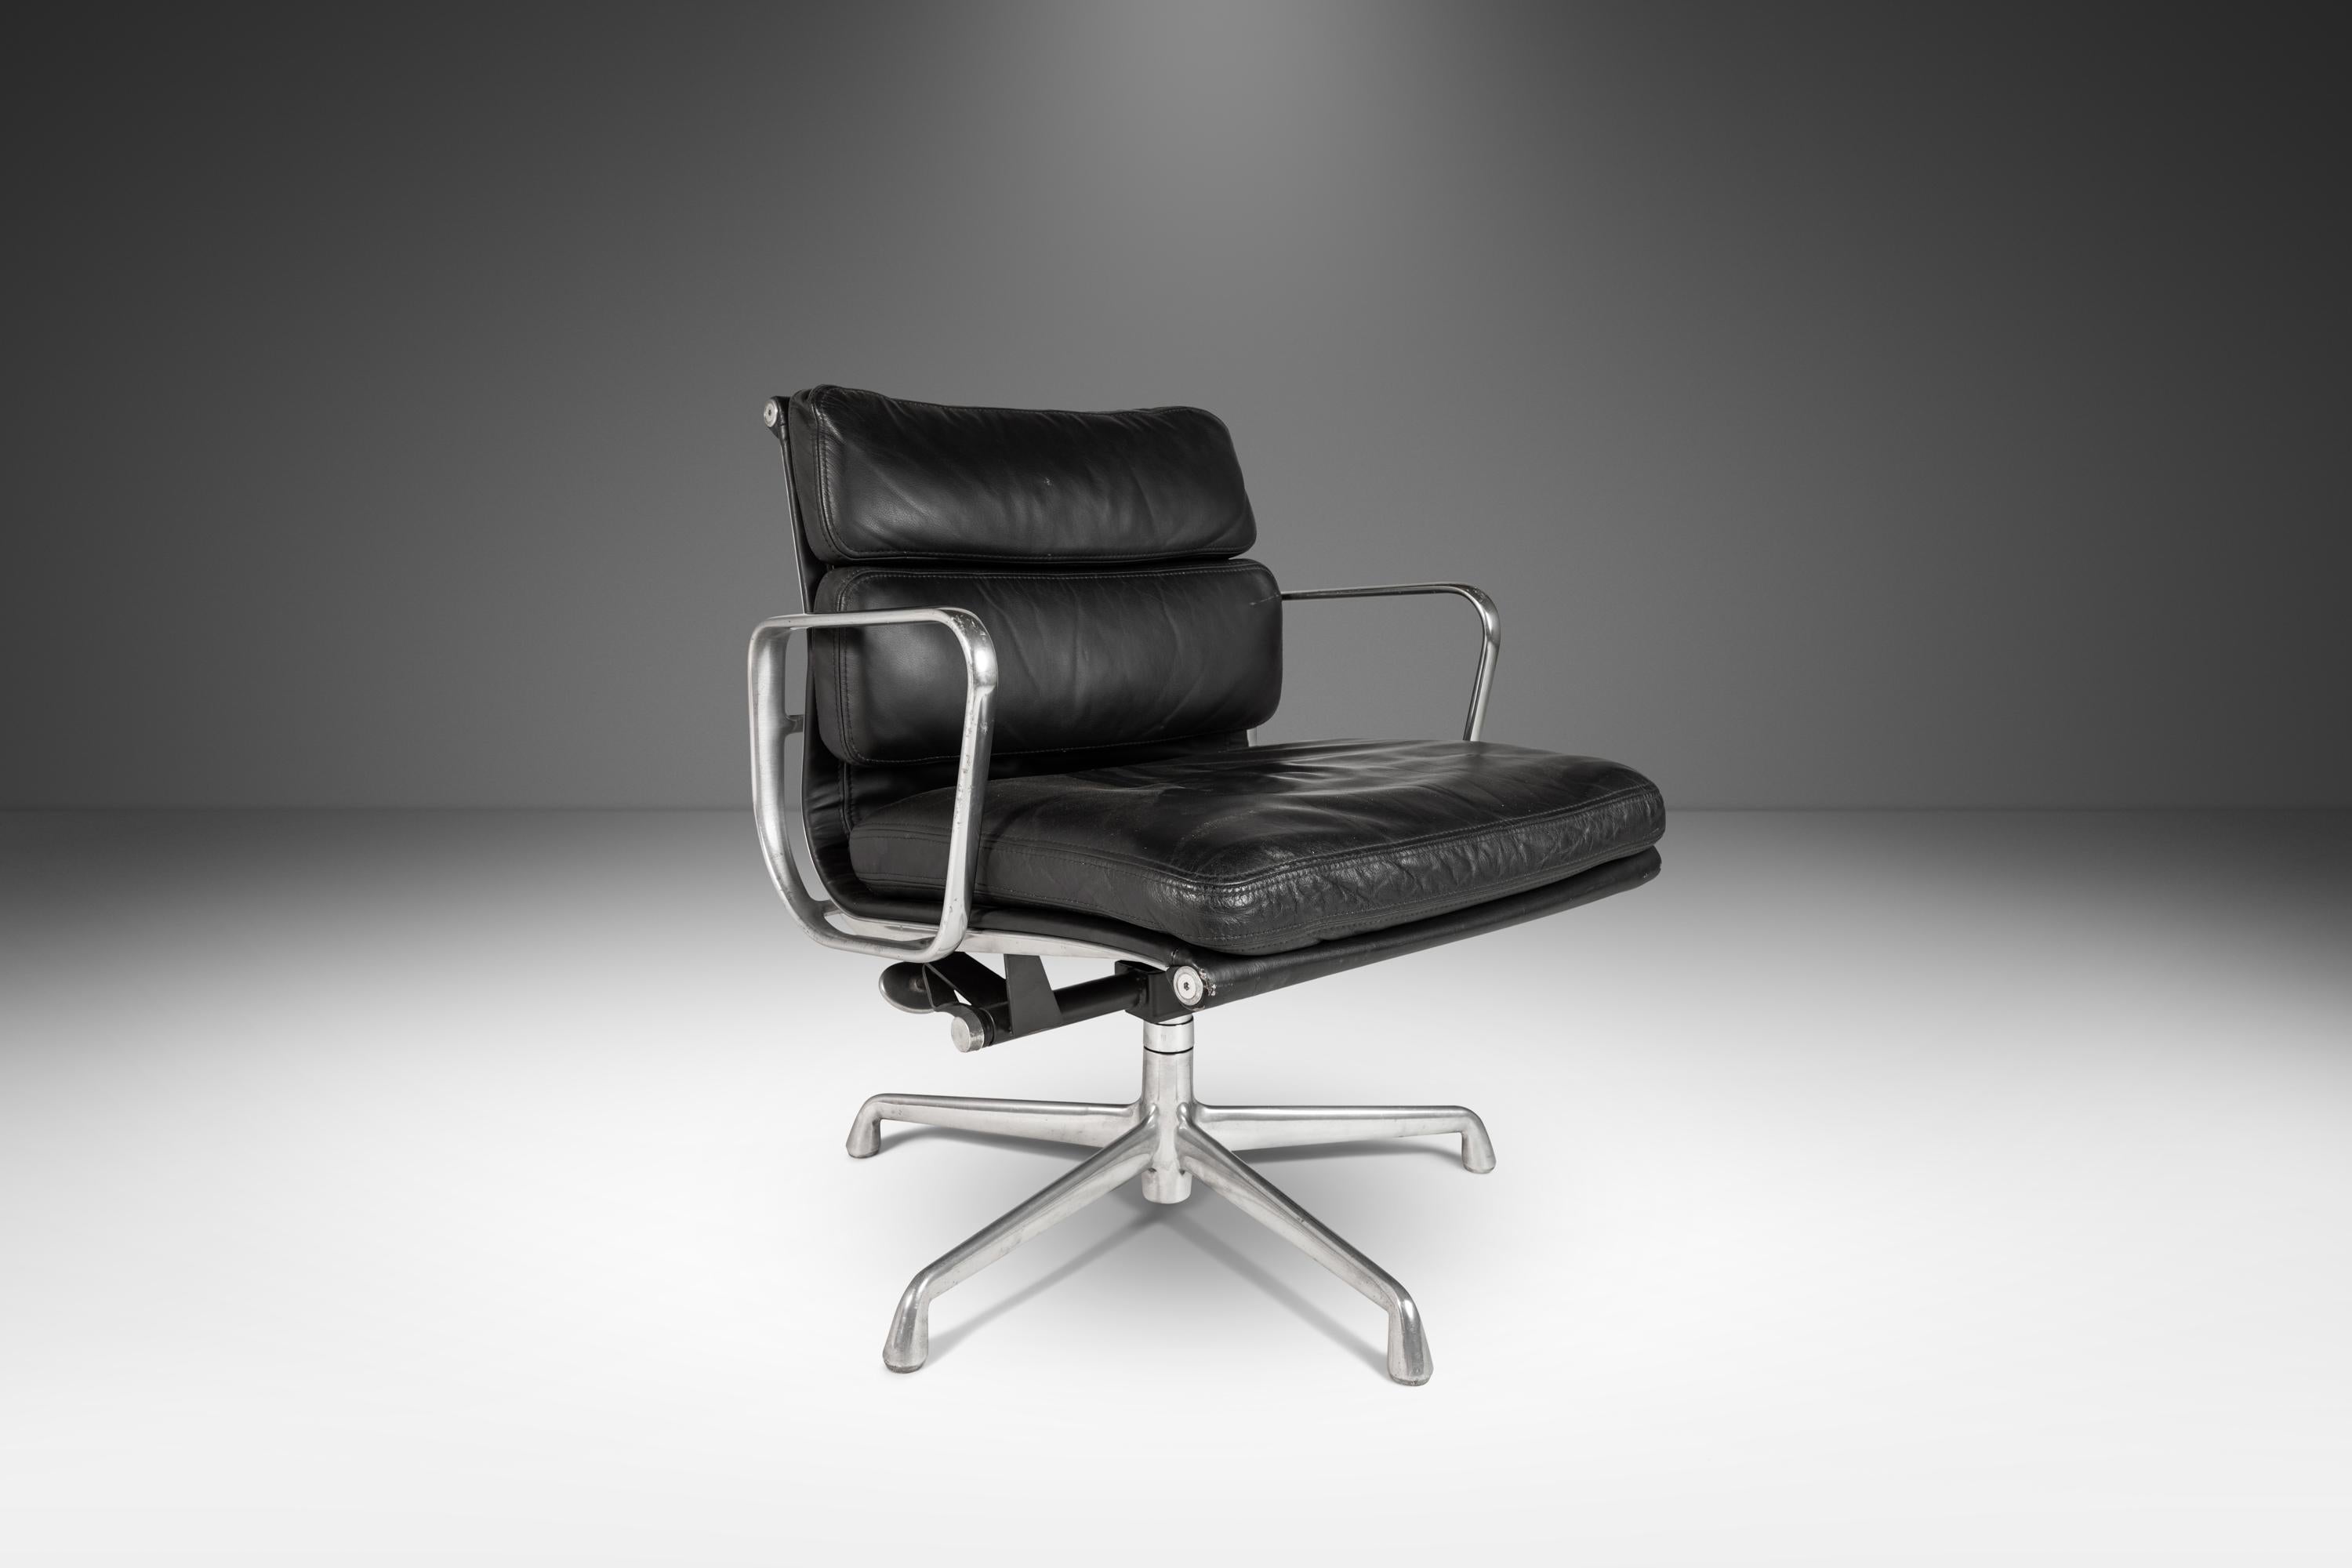 Timeless, sophisticated, refined. Created by the iconic Eames couple, who were never ones to favor style over substance, designed this chair with an innovative suspension that creates a firm, flexible 